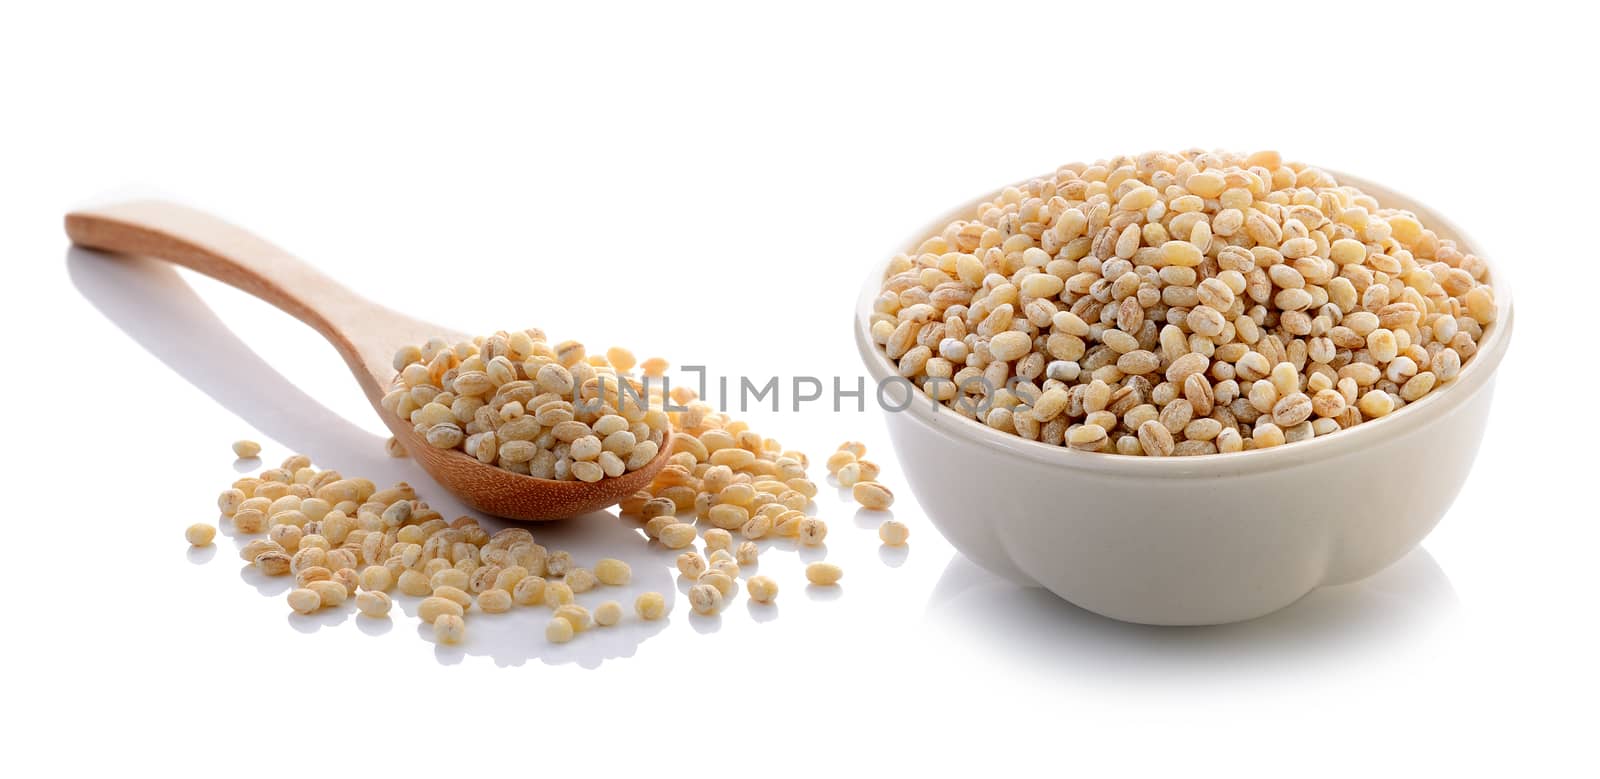 Job's tear seed in the white bowl on white background